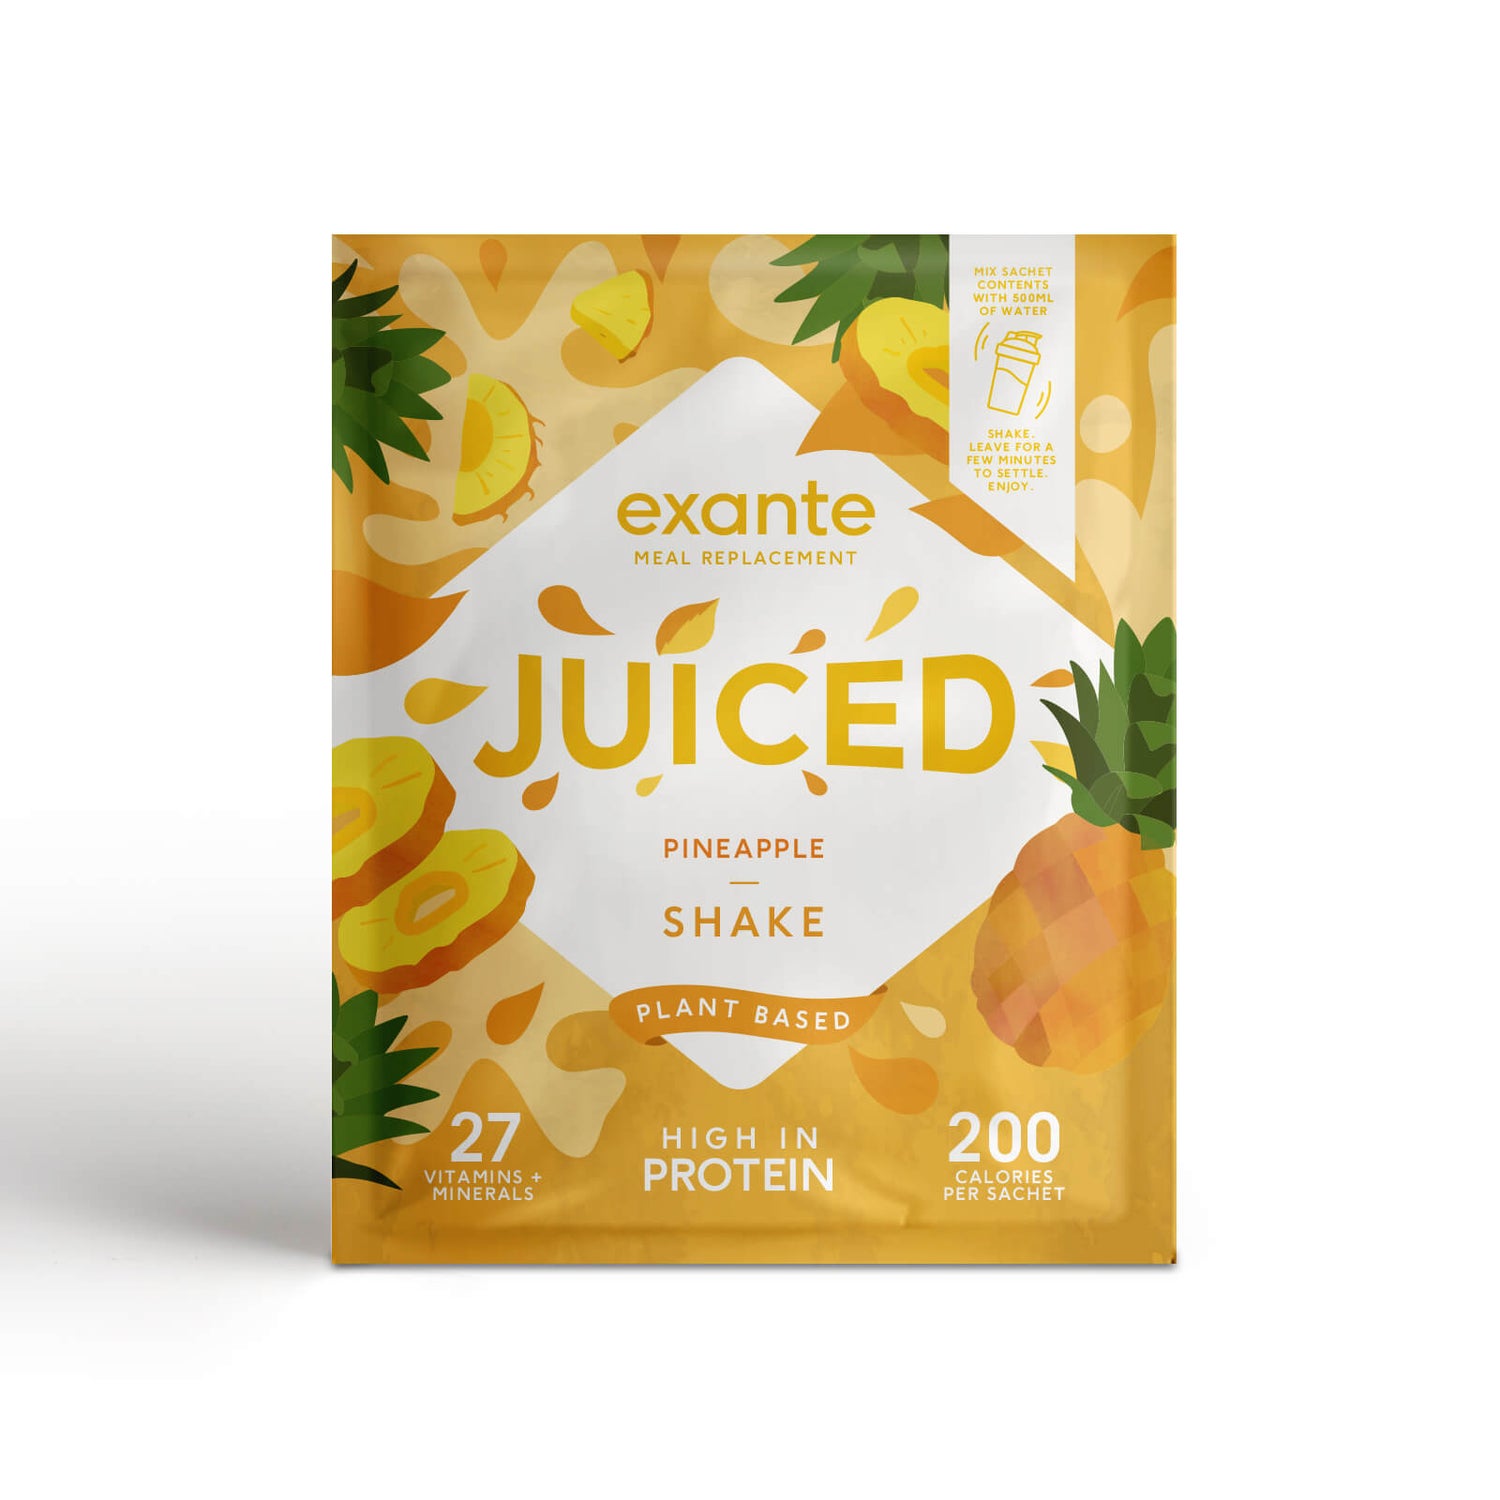 Pineapple JUICED Meal Replacement Shake